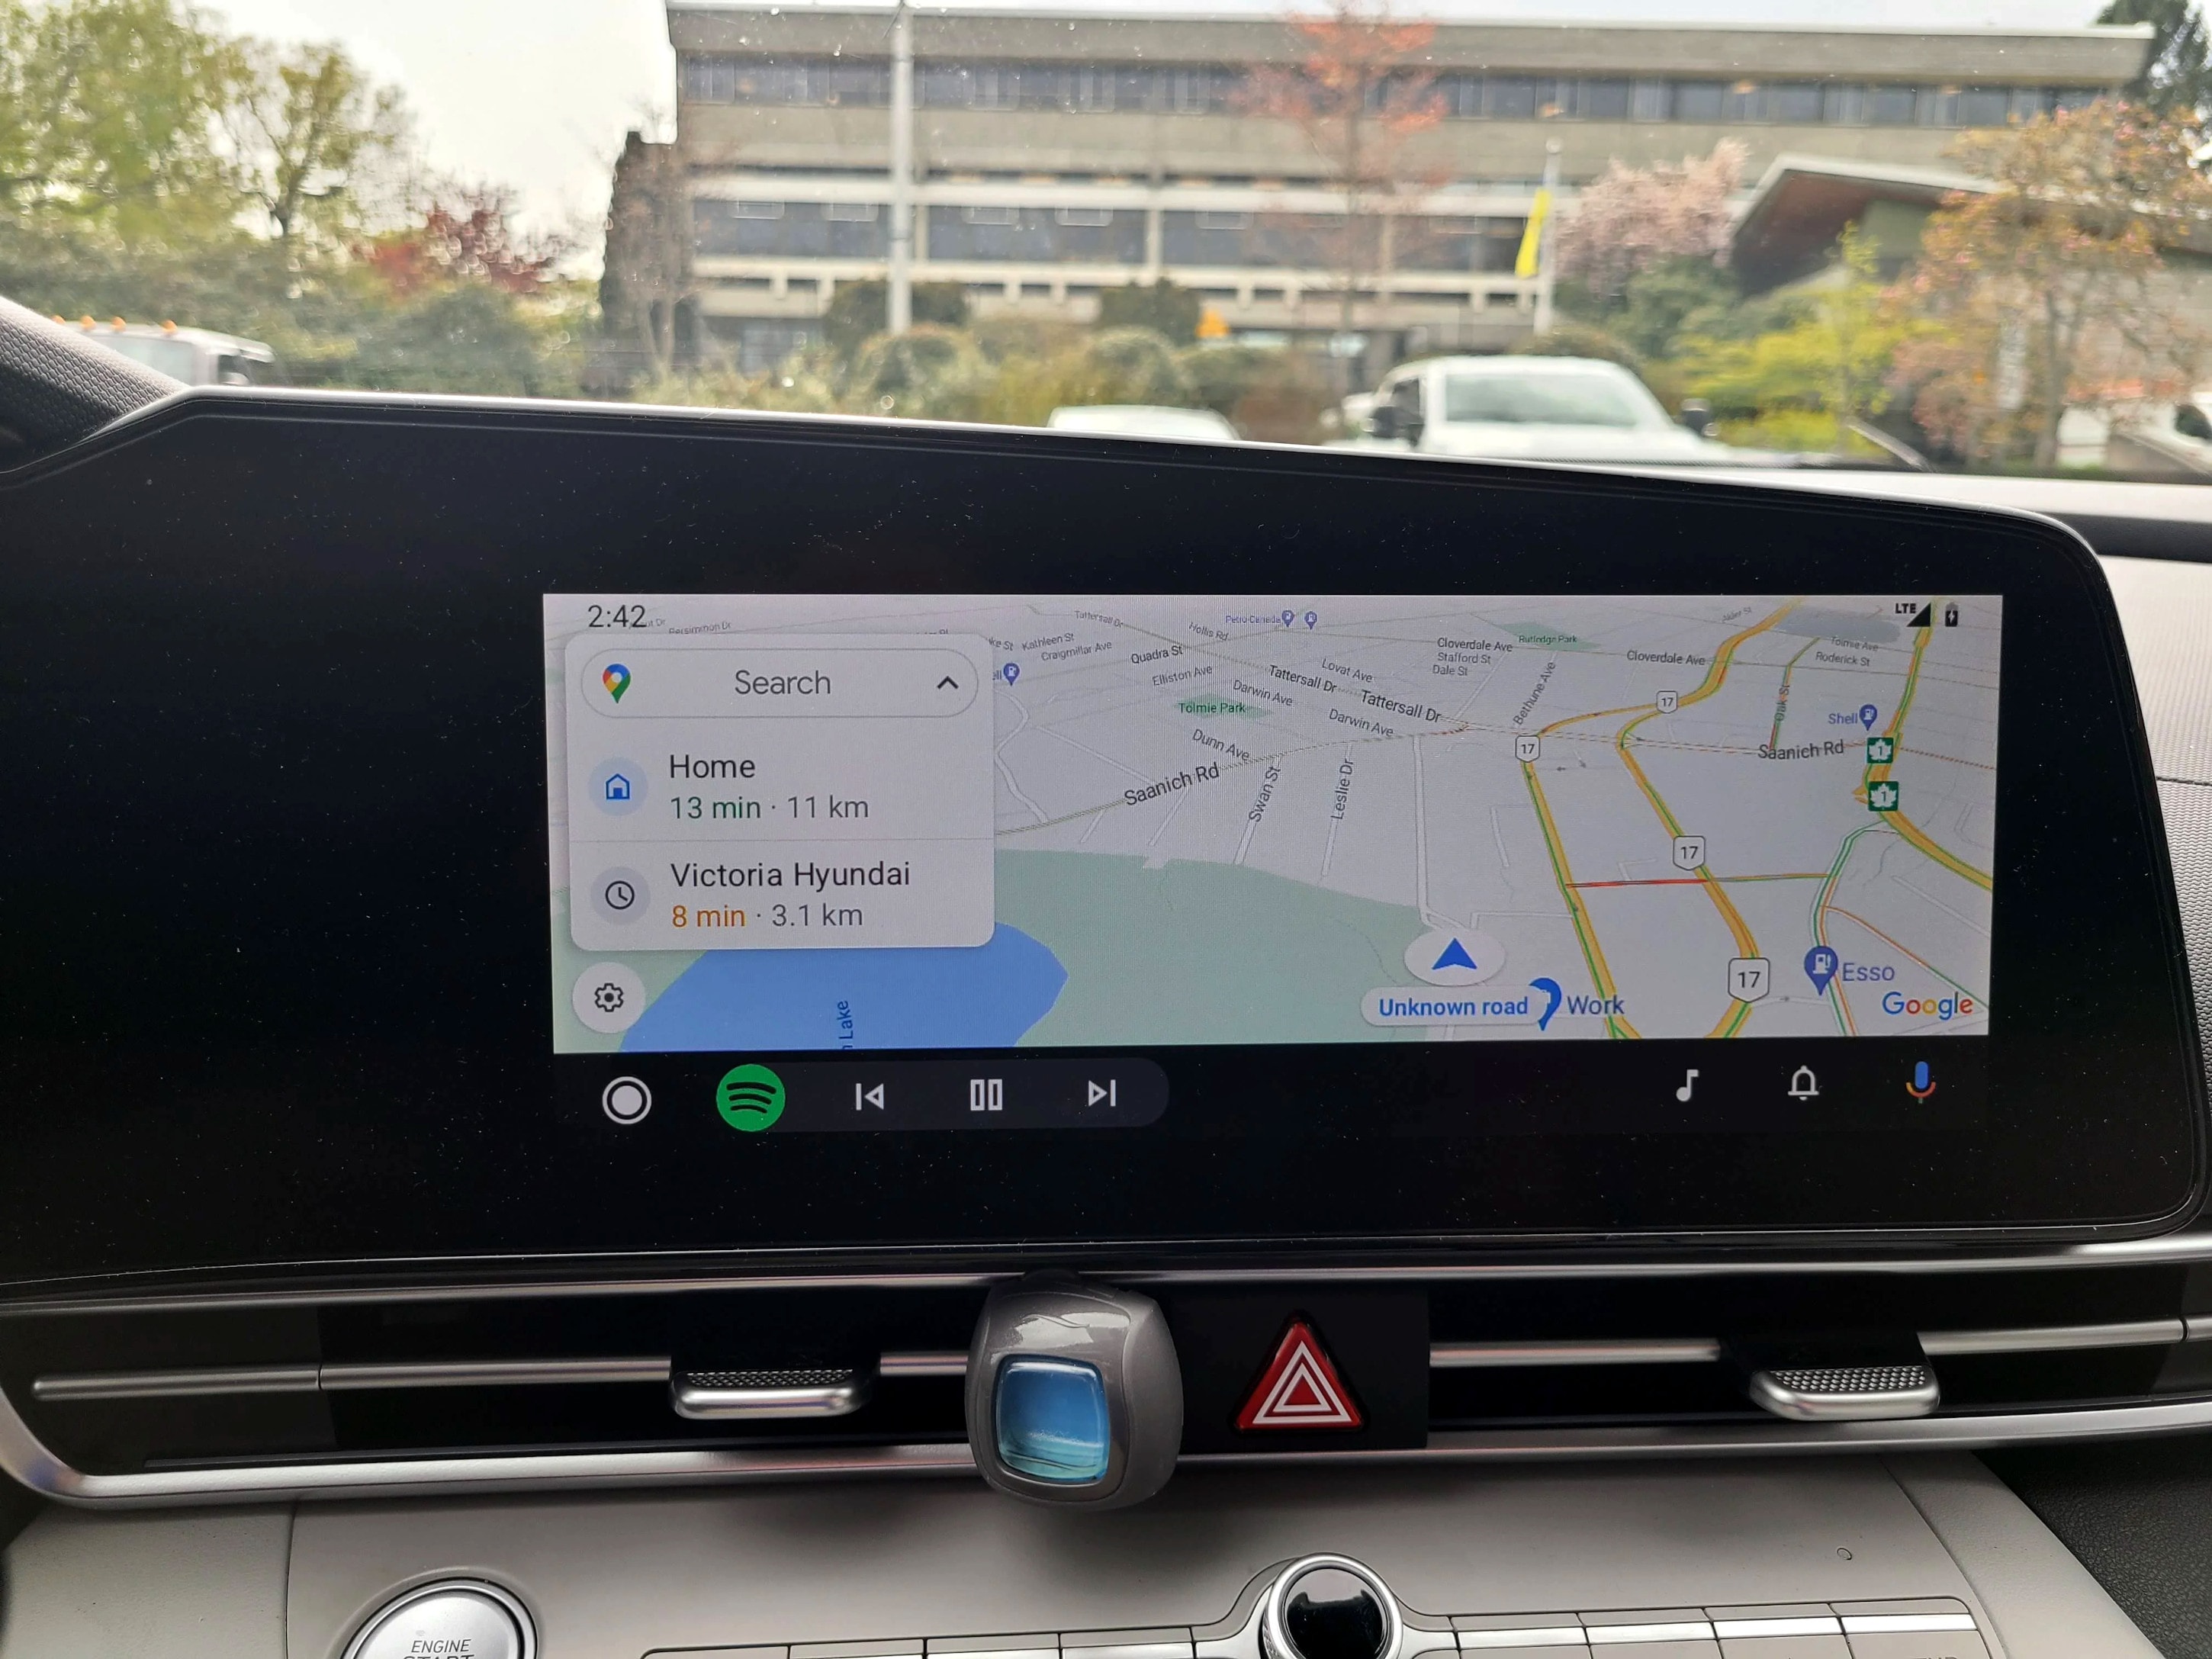 https://s1.cdn.autoevolution.com/images/news/major-android-auto-update-now-available-for-hyundai-and-kia-cars-187865_1.jpg